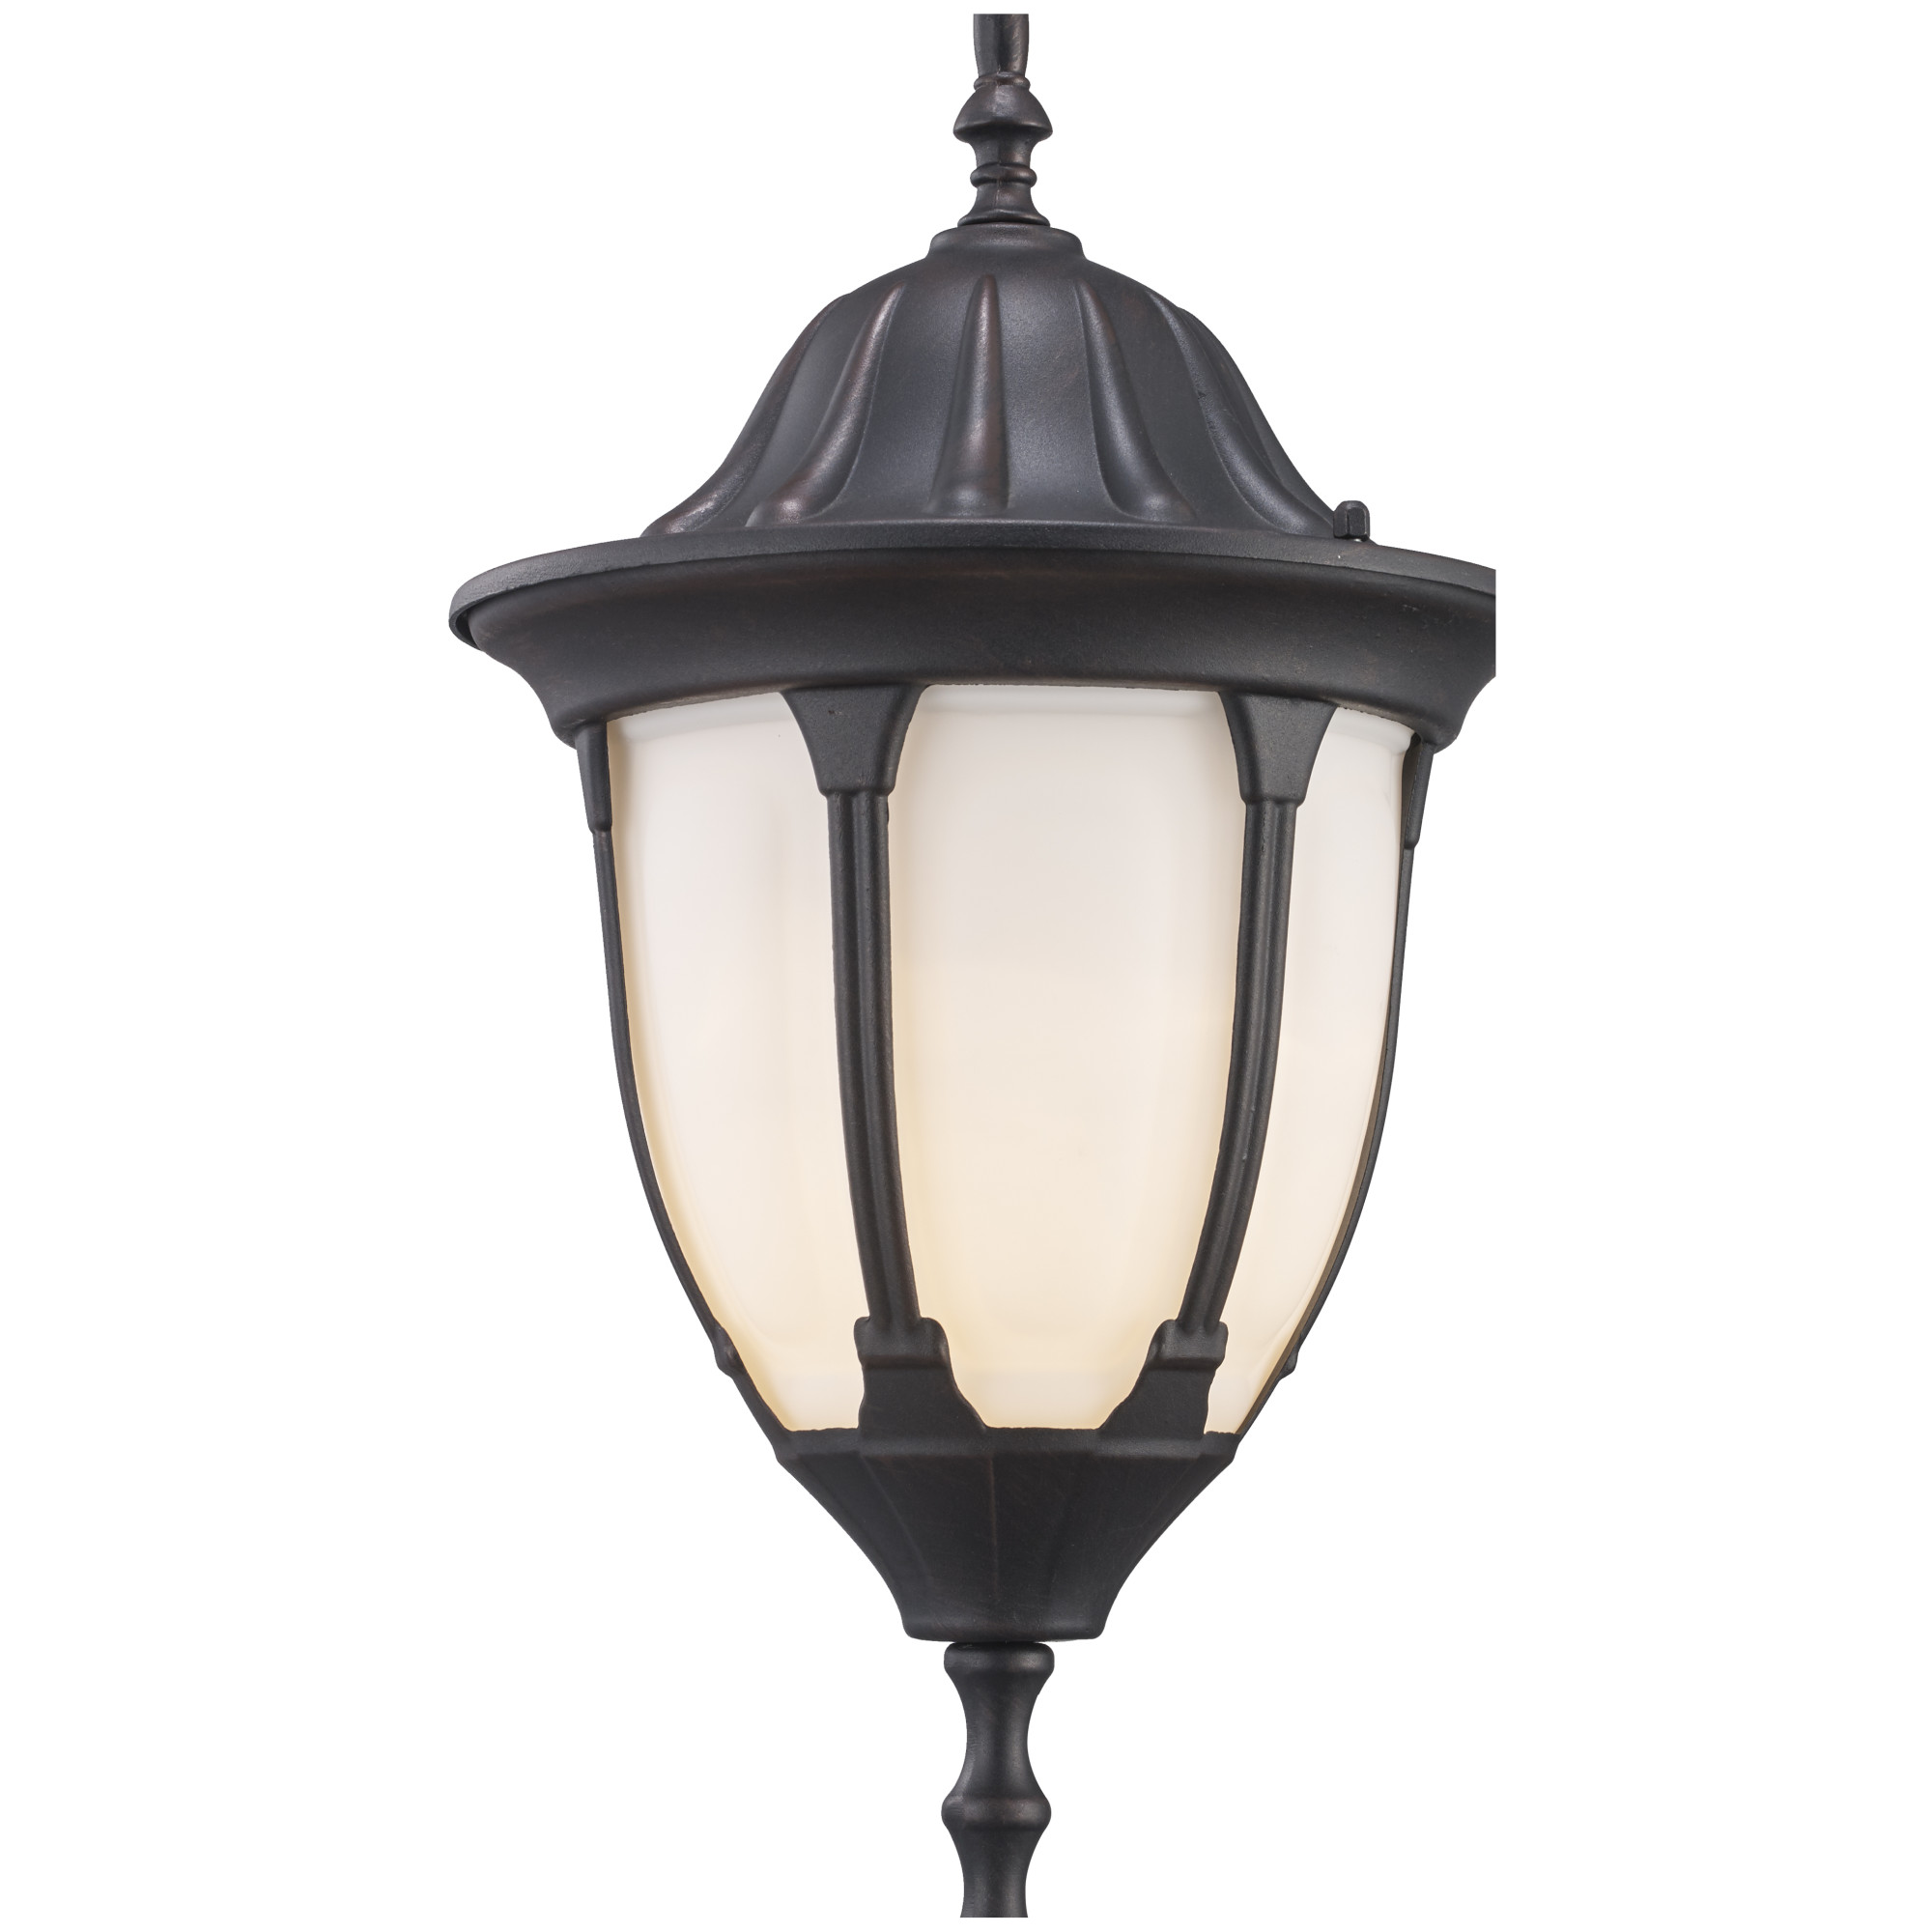 Trans Globe Lighting 4040 1 Light Up Lighting Outdoor Small Wall Sconce From The Outdoor - image 4 of 5